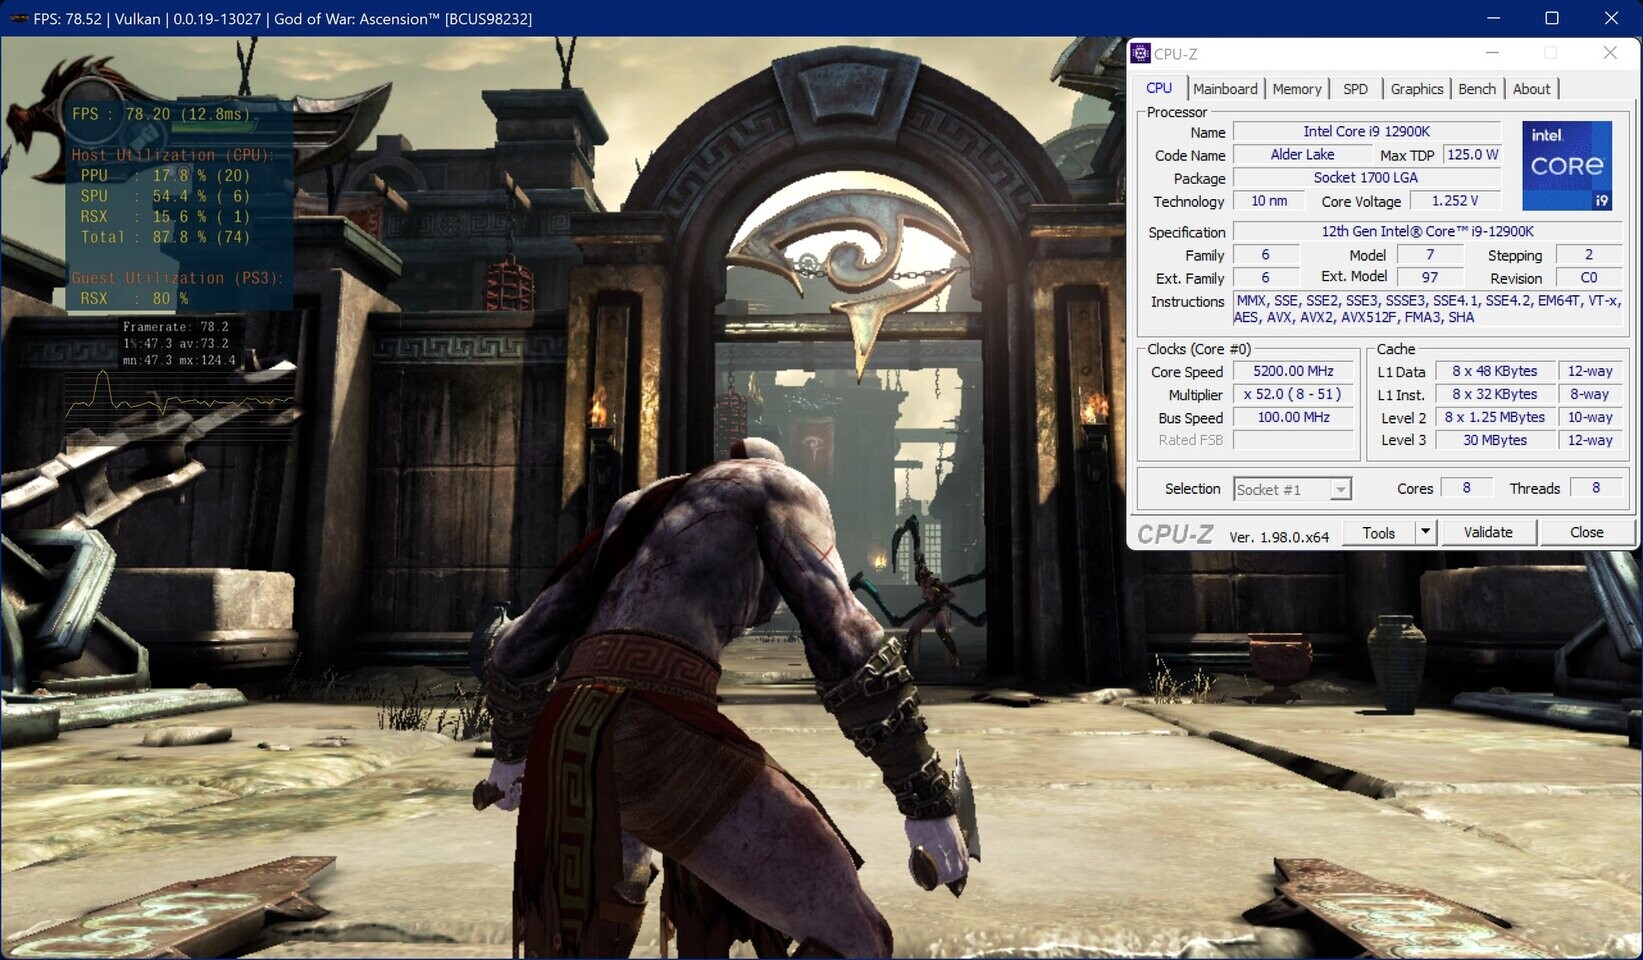 PS3 Emulator RPCS3 Adds Graphical Fixes for Uncharted 2, The Last